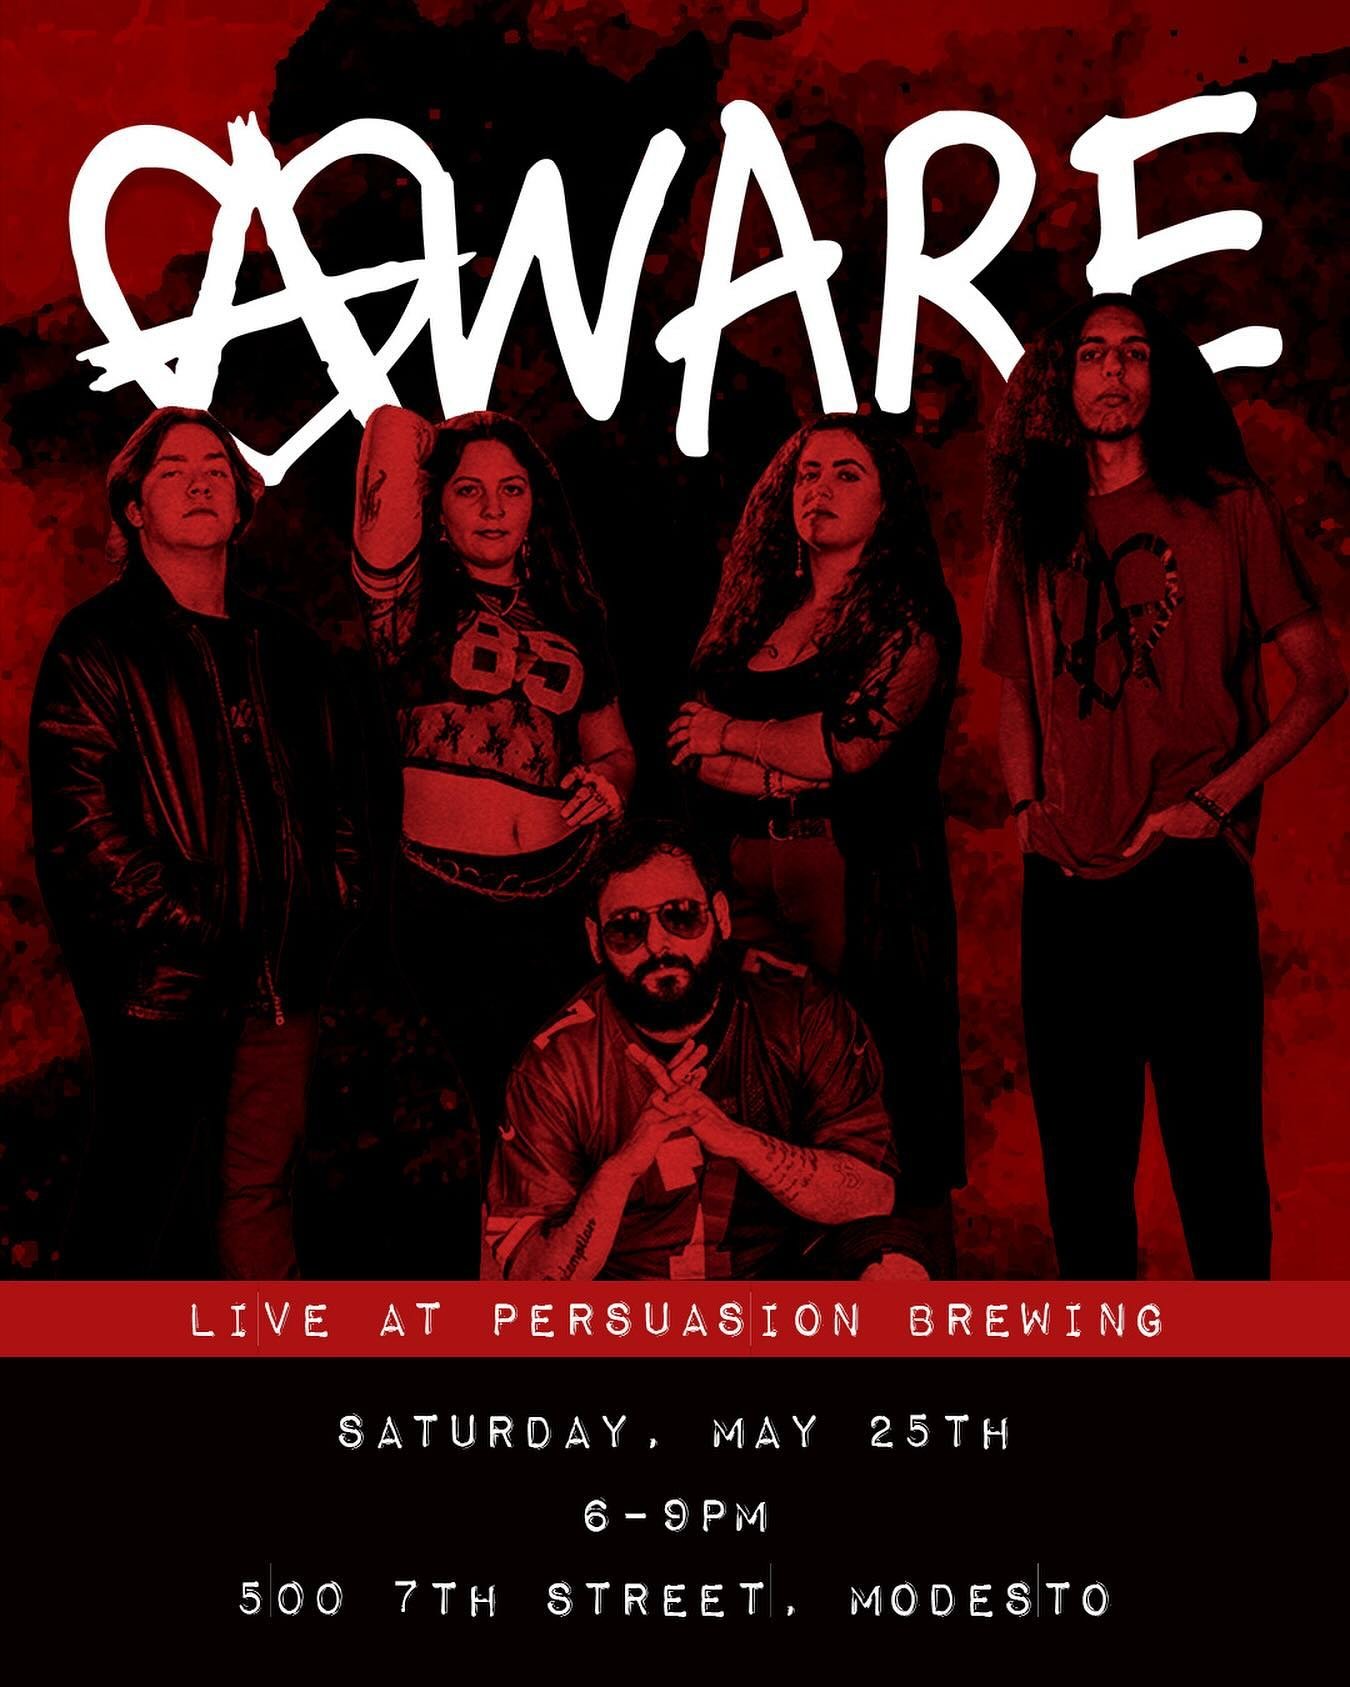 Persuasion, we&rsquo;re comin&rsquo; back for ya! On Saturday, May 25th to be exact😎🔥 See ya there!

Poster made by @seeing.lavender #porchfest #alternative #hardrock #thebandaware #209
#centralvalley #rockband